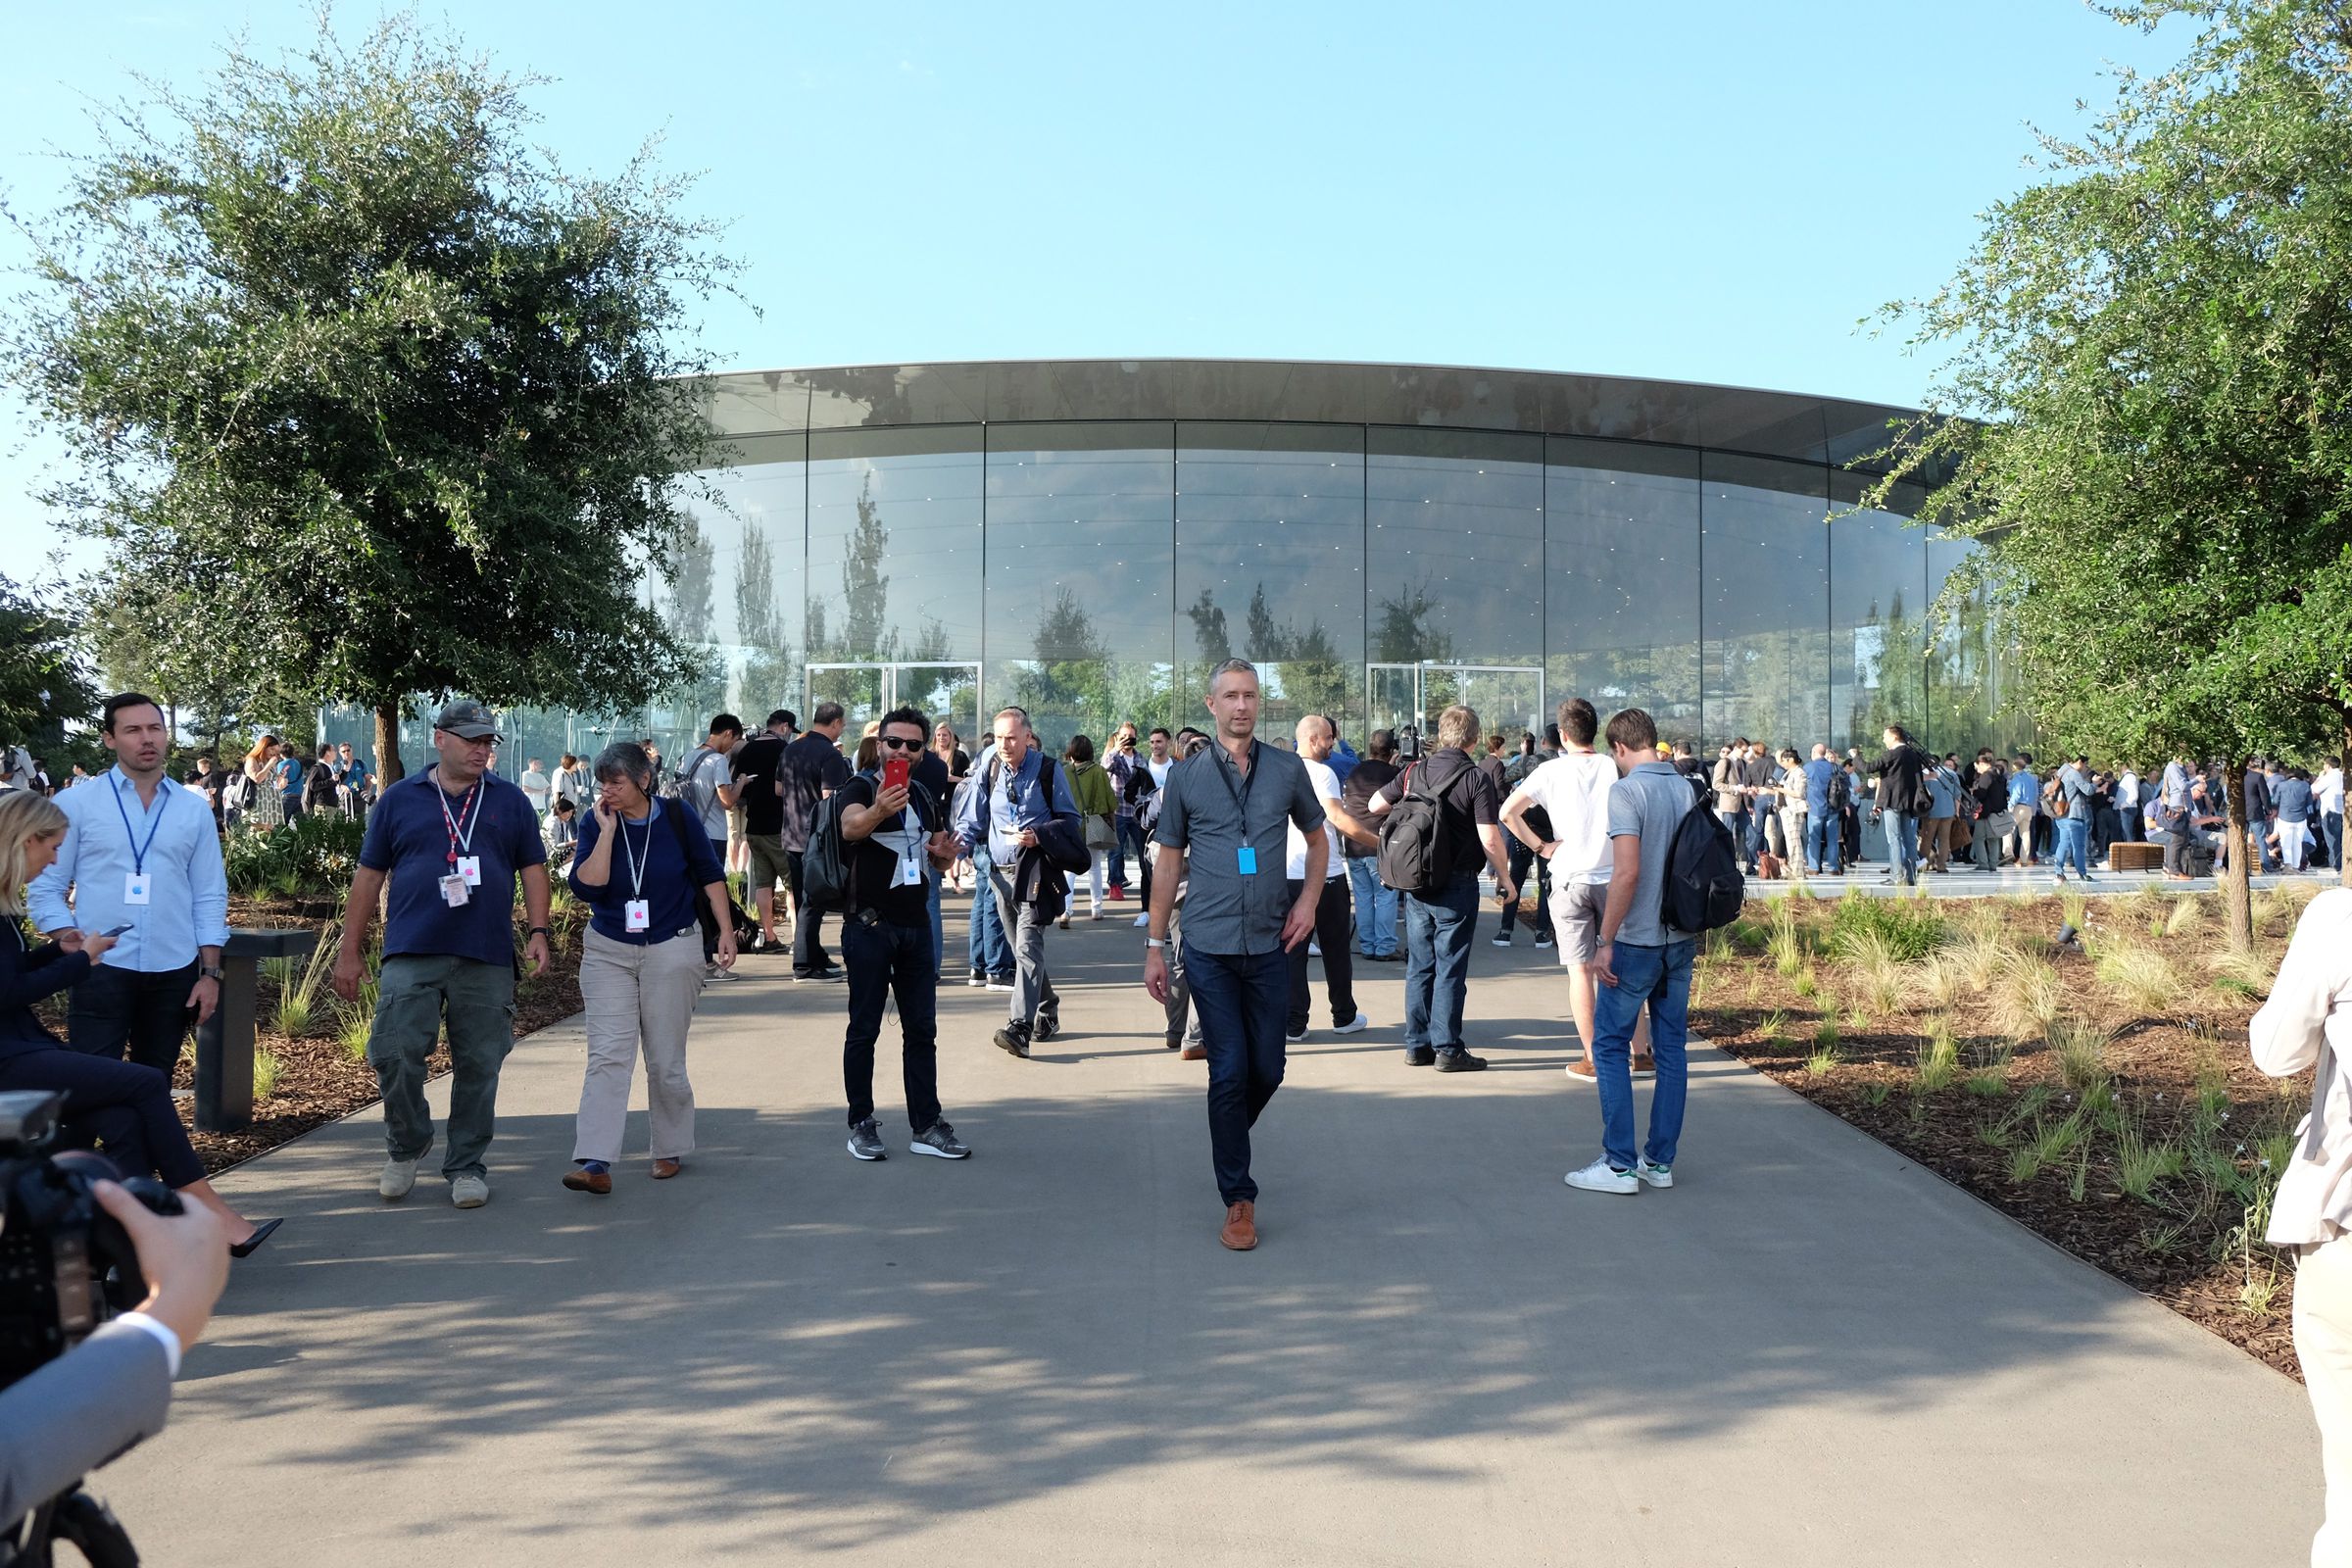 Entrance of the Steve Jobs Theater. This image is from a [great photo series](https://www.recode.net/2017/9/13/16299086/apple-park-steve-jobs-theater-iphone-event-photos) taken during the iPhone X introduction and published by Re/code.